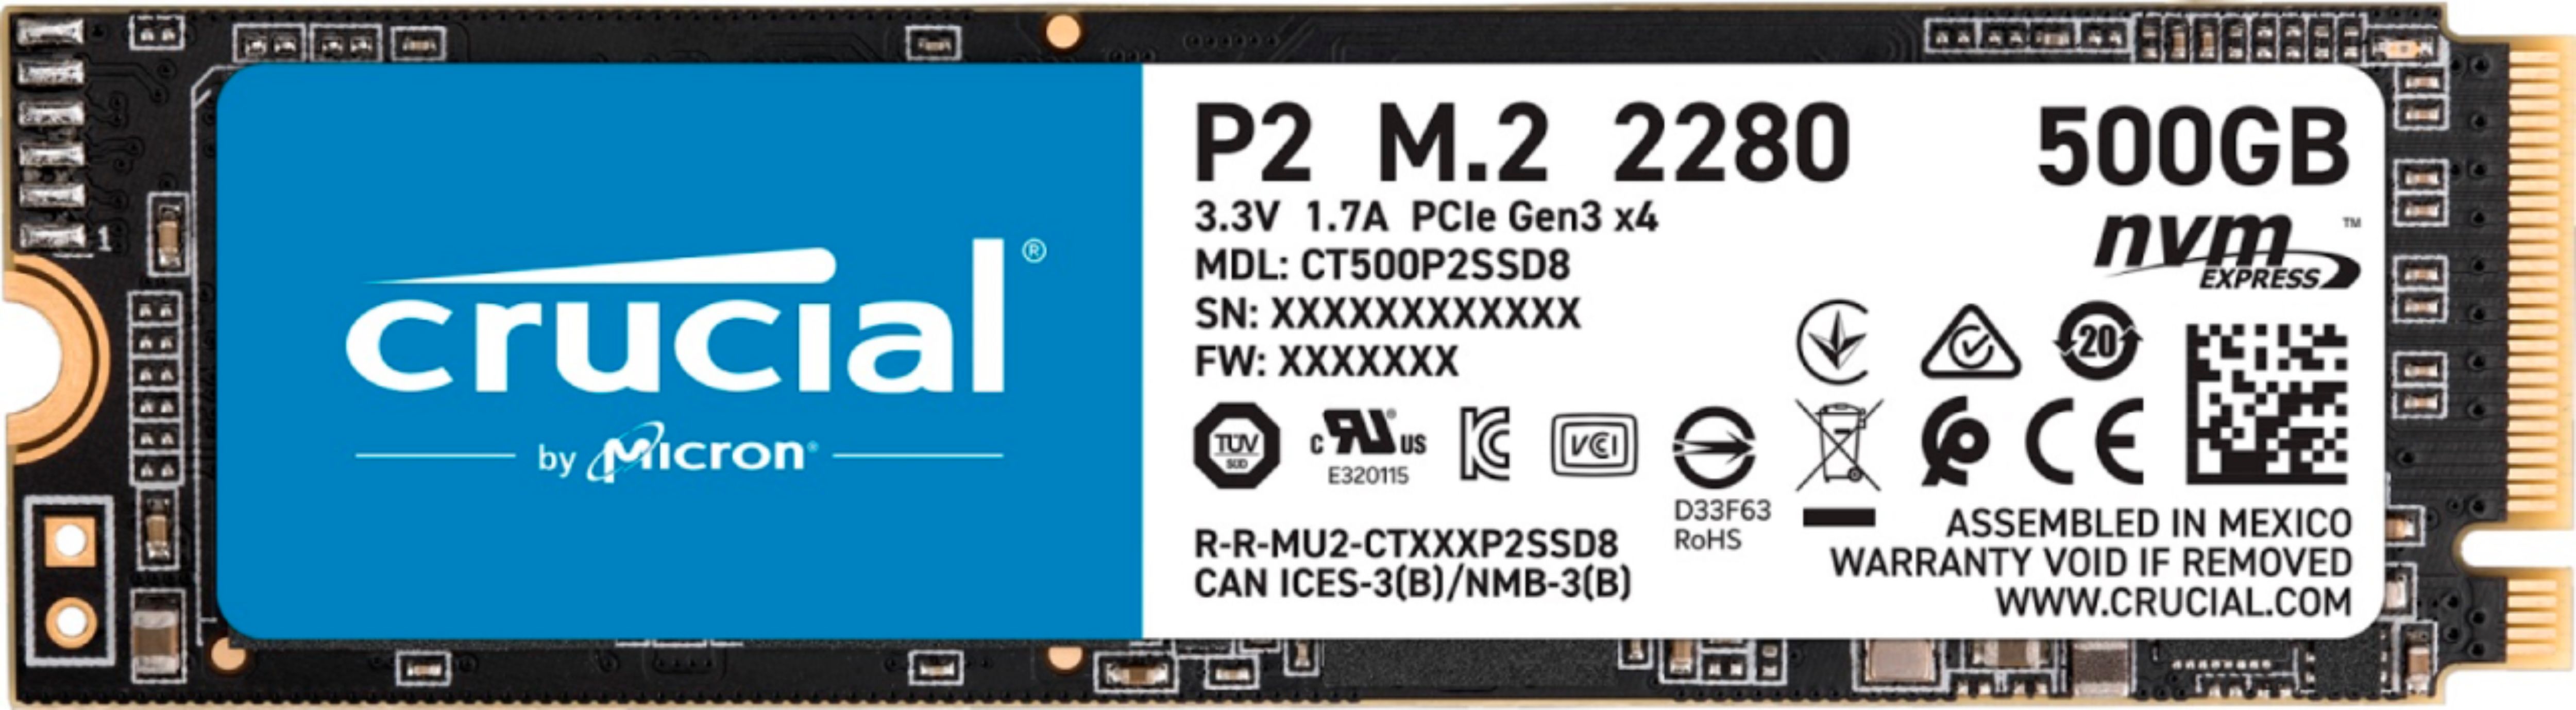 Questions and Answers: Crucial P2 500GB Internal SSD PCIe Gen 3 x4